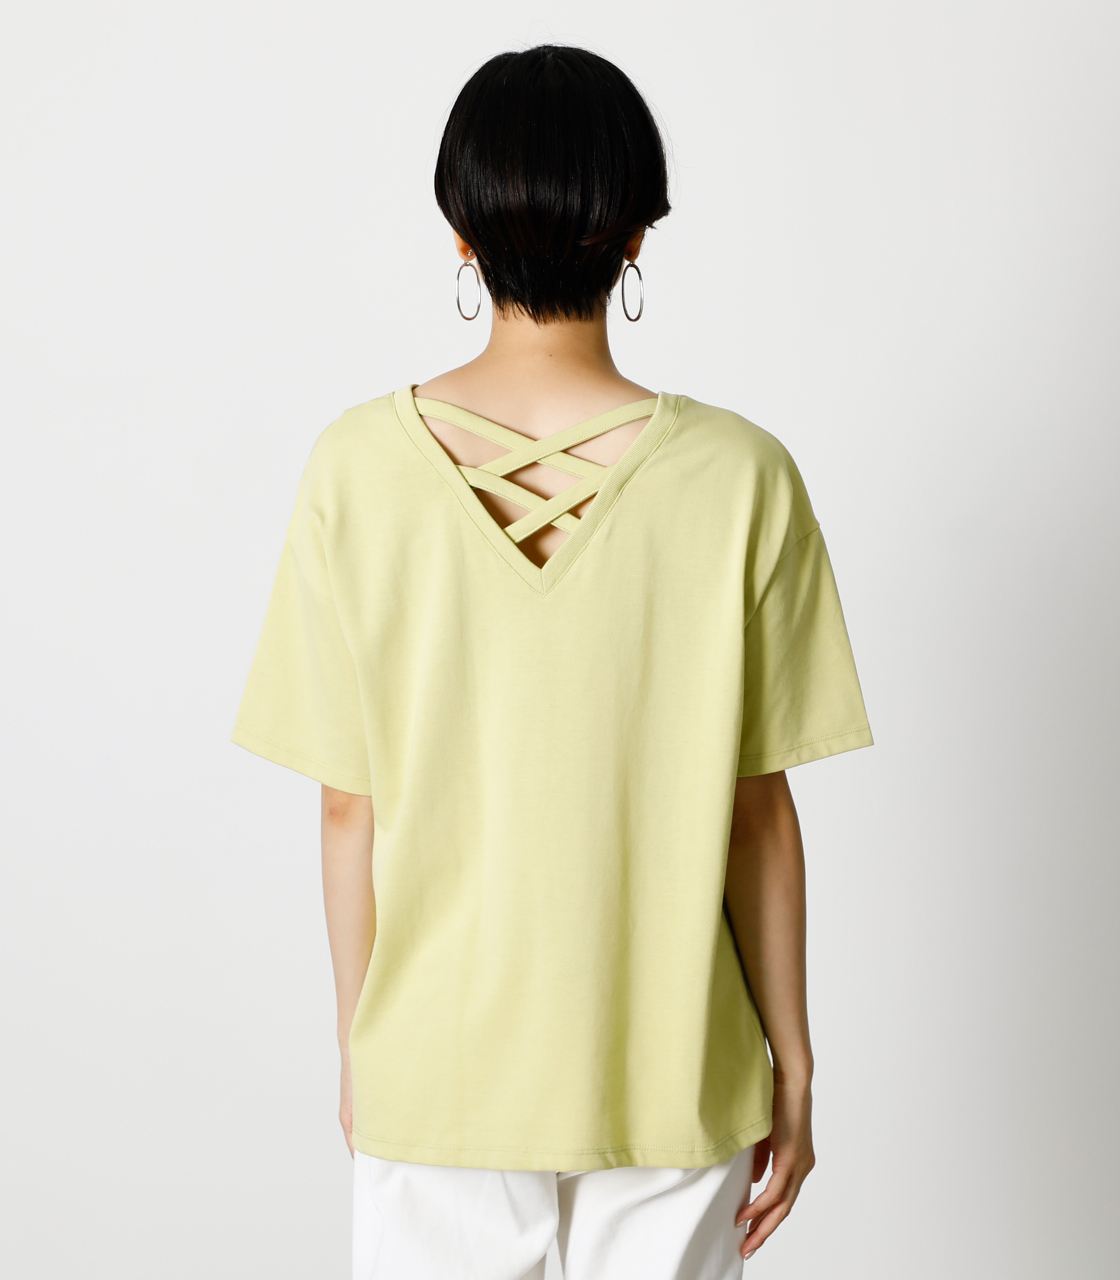 BIG LAYERED TOPS/ビッグレイヤードトップス 詳細画像 LIME 6